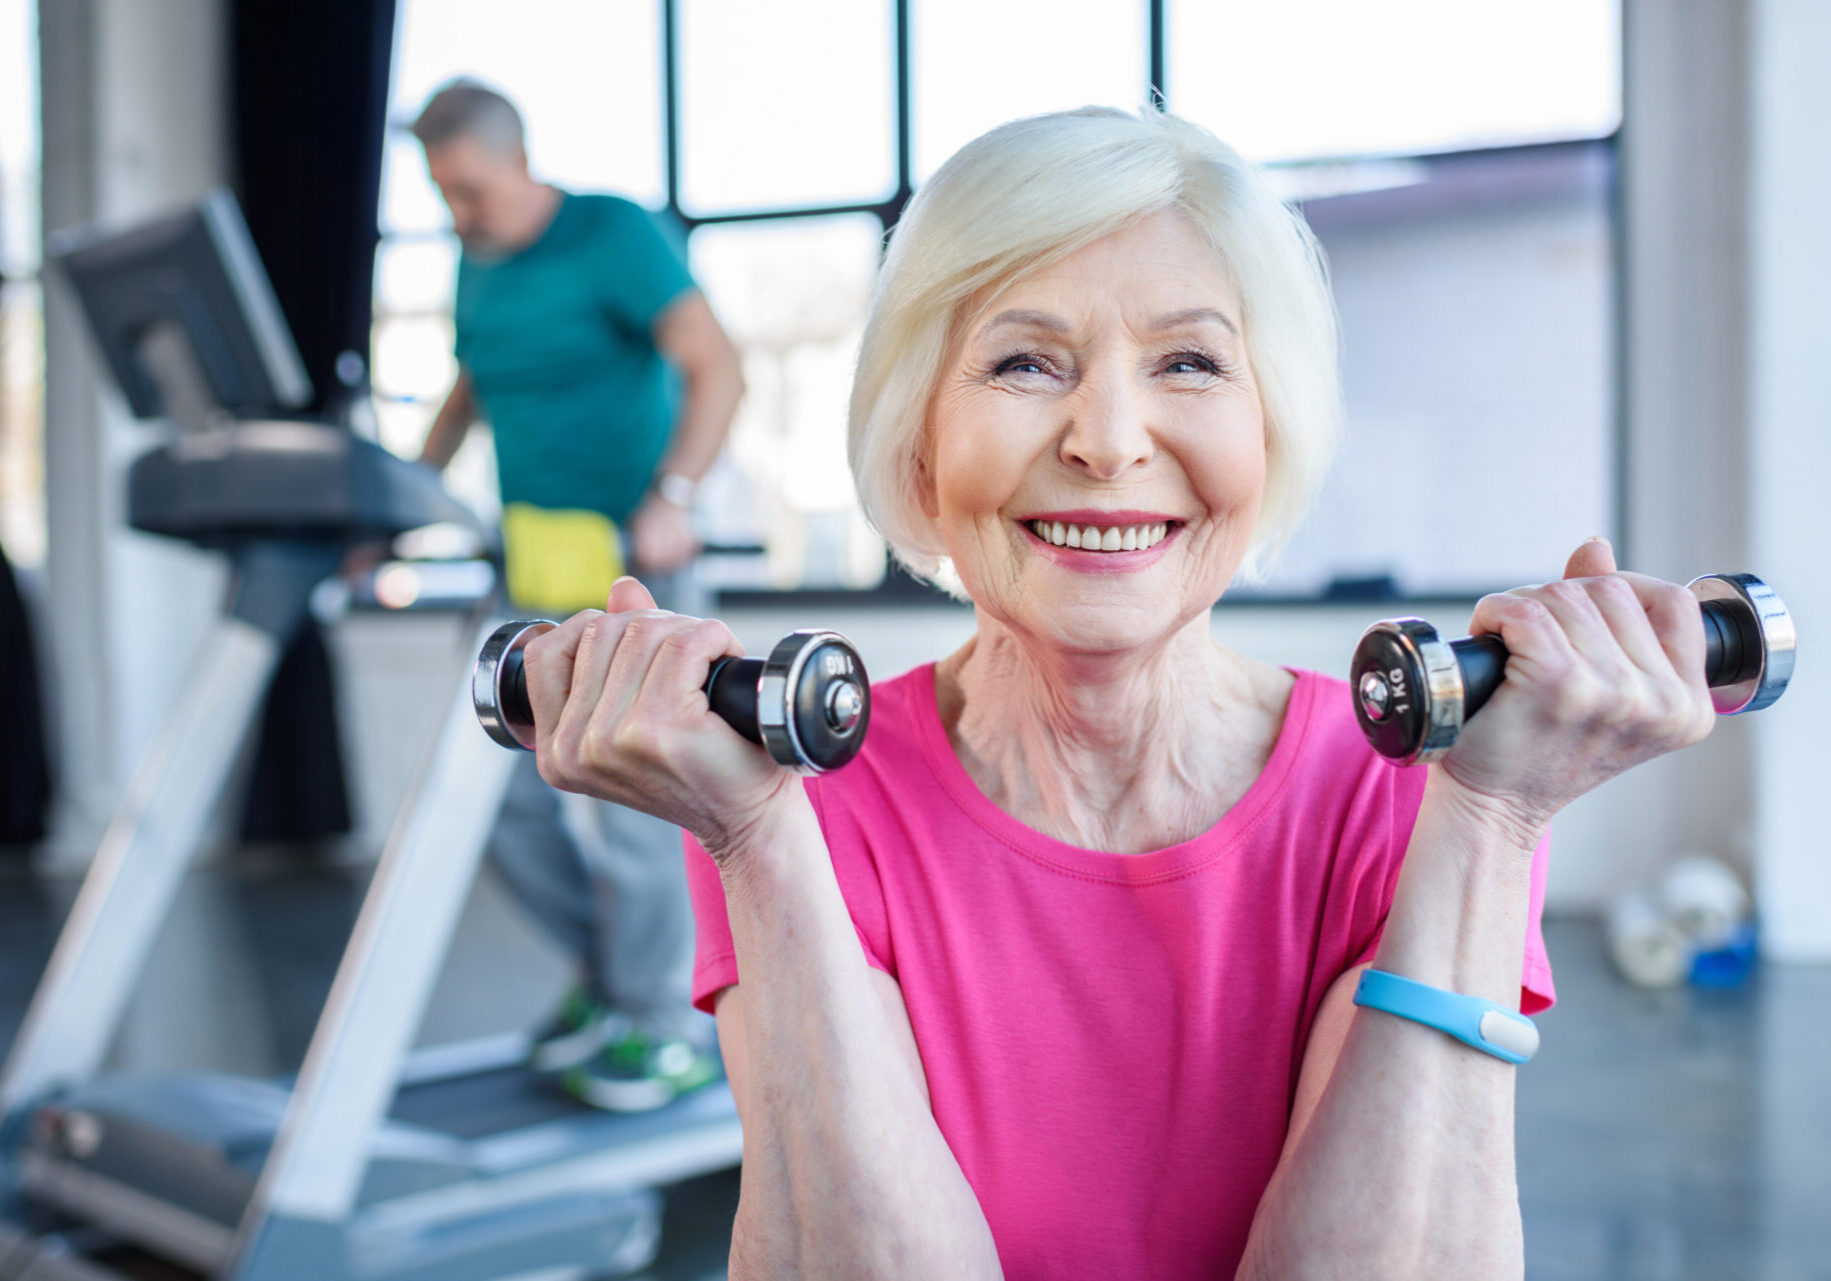 A woman is holding two dumbbells in her hands.